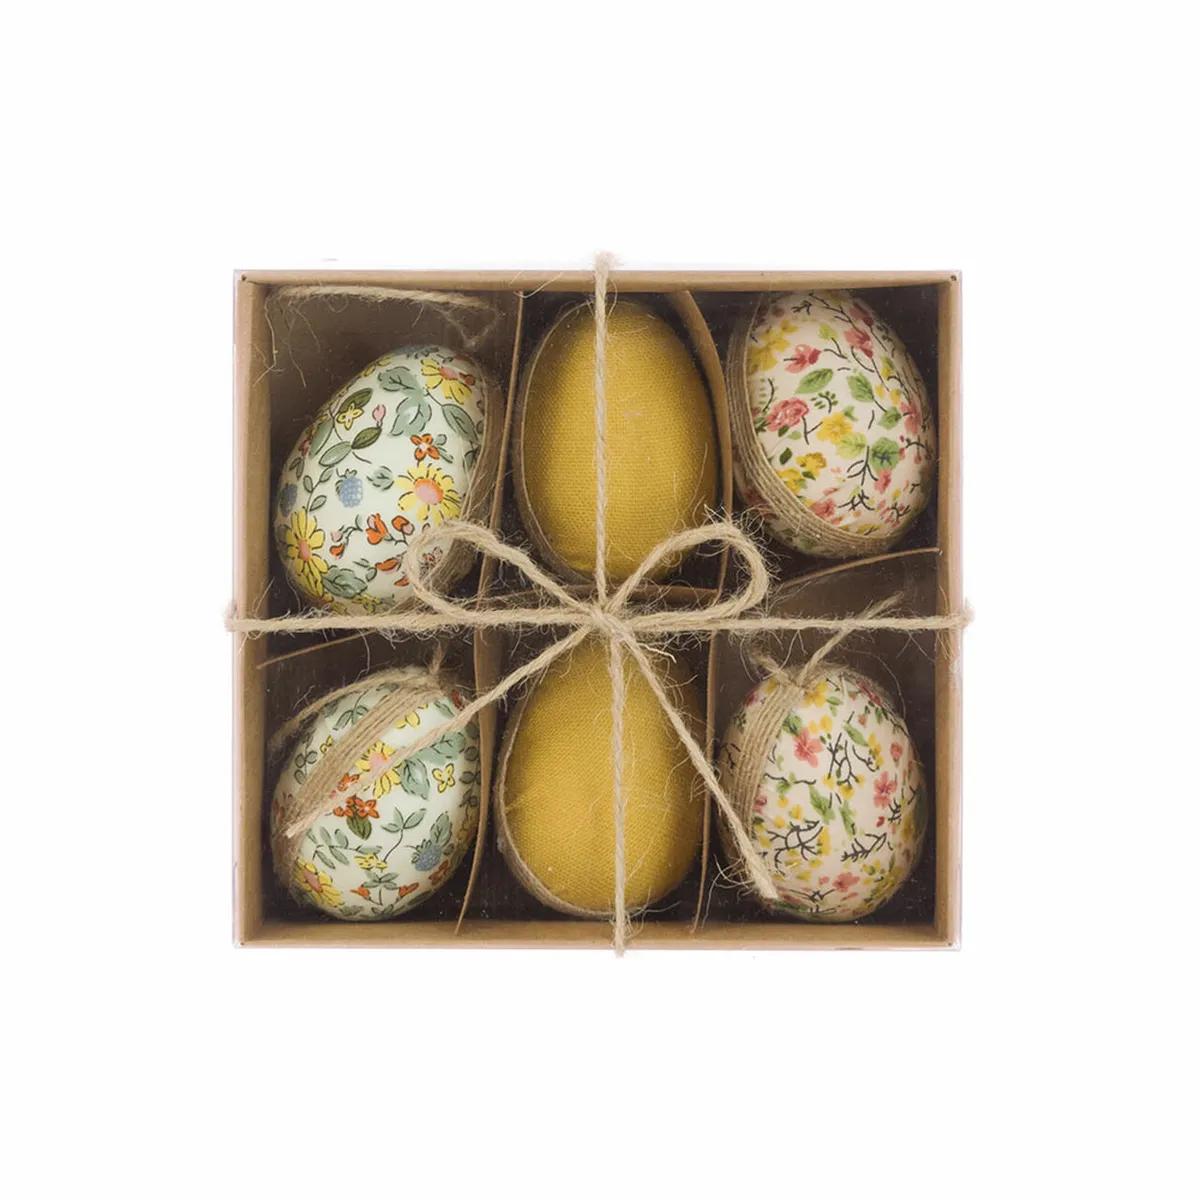 Vintage Rustic Fabric Hanging Easter Eggs